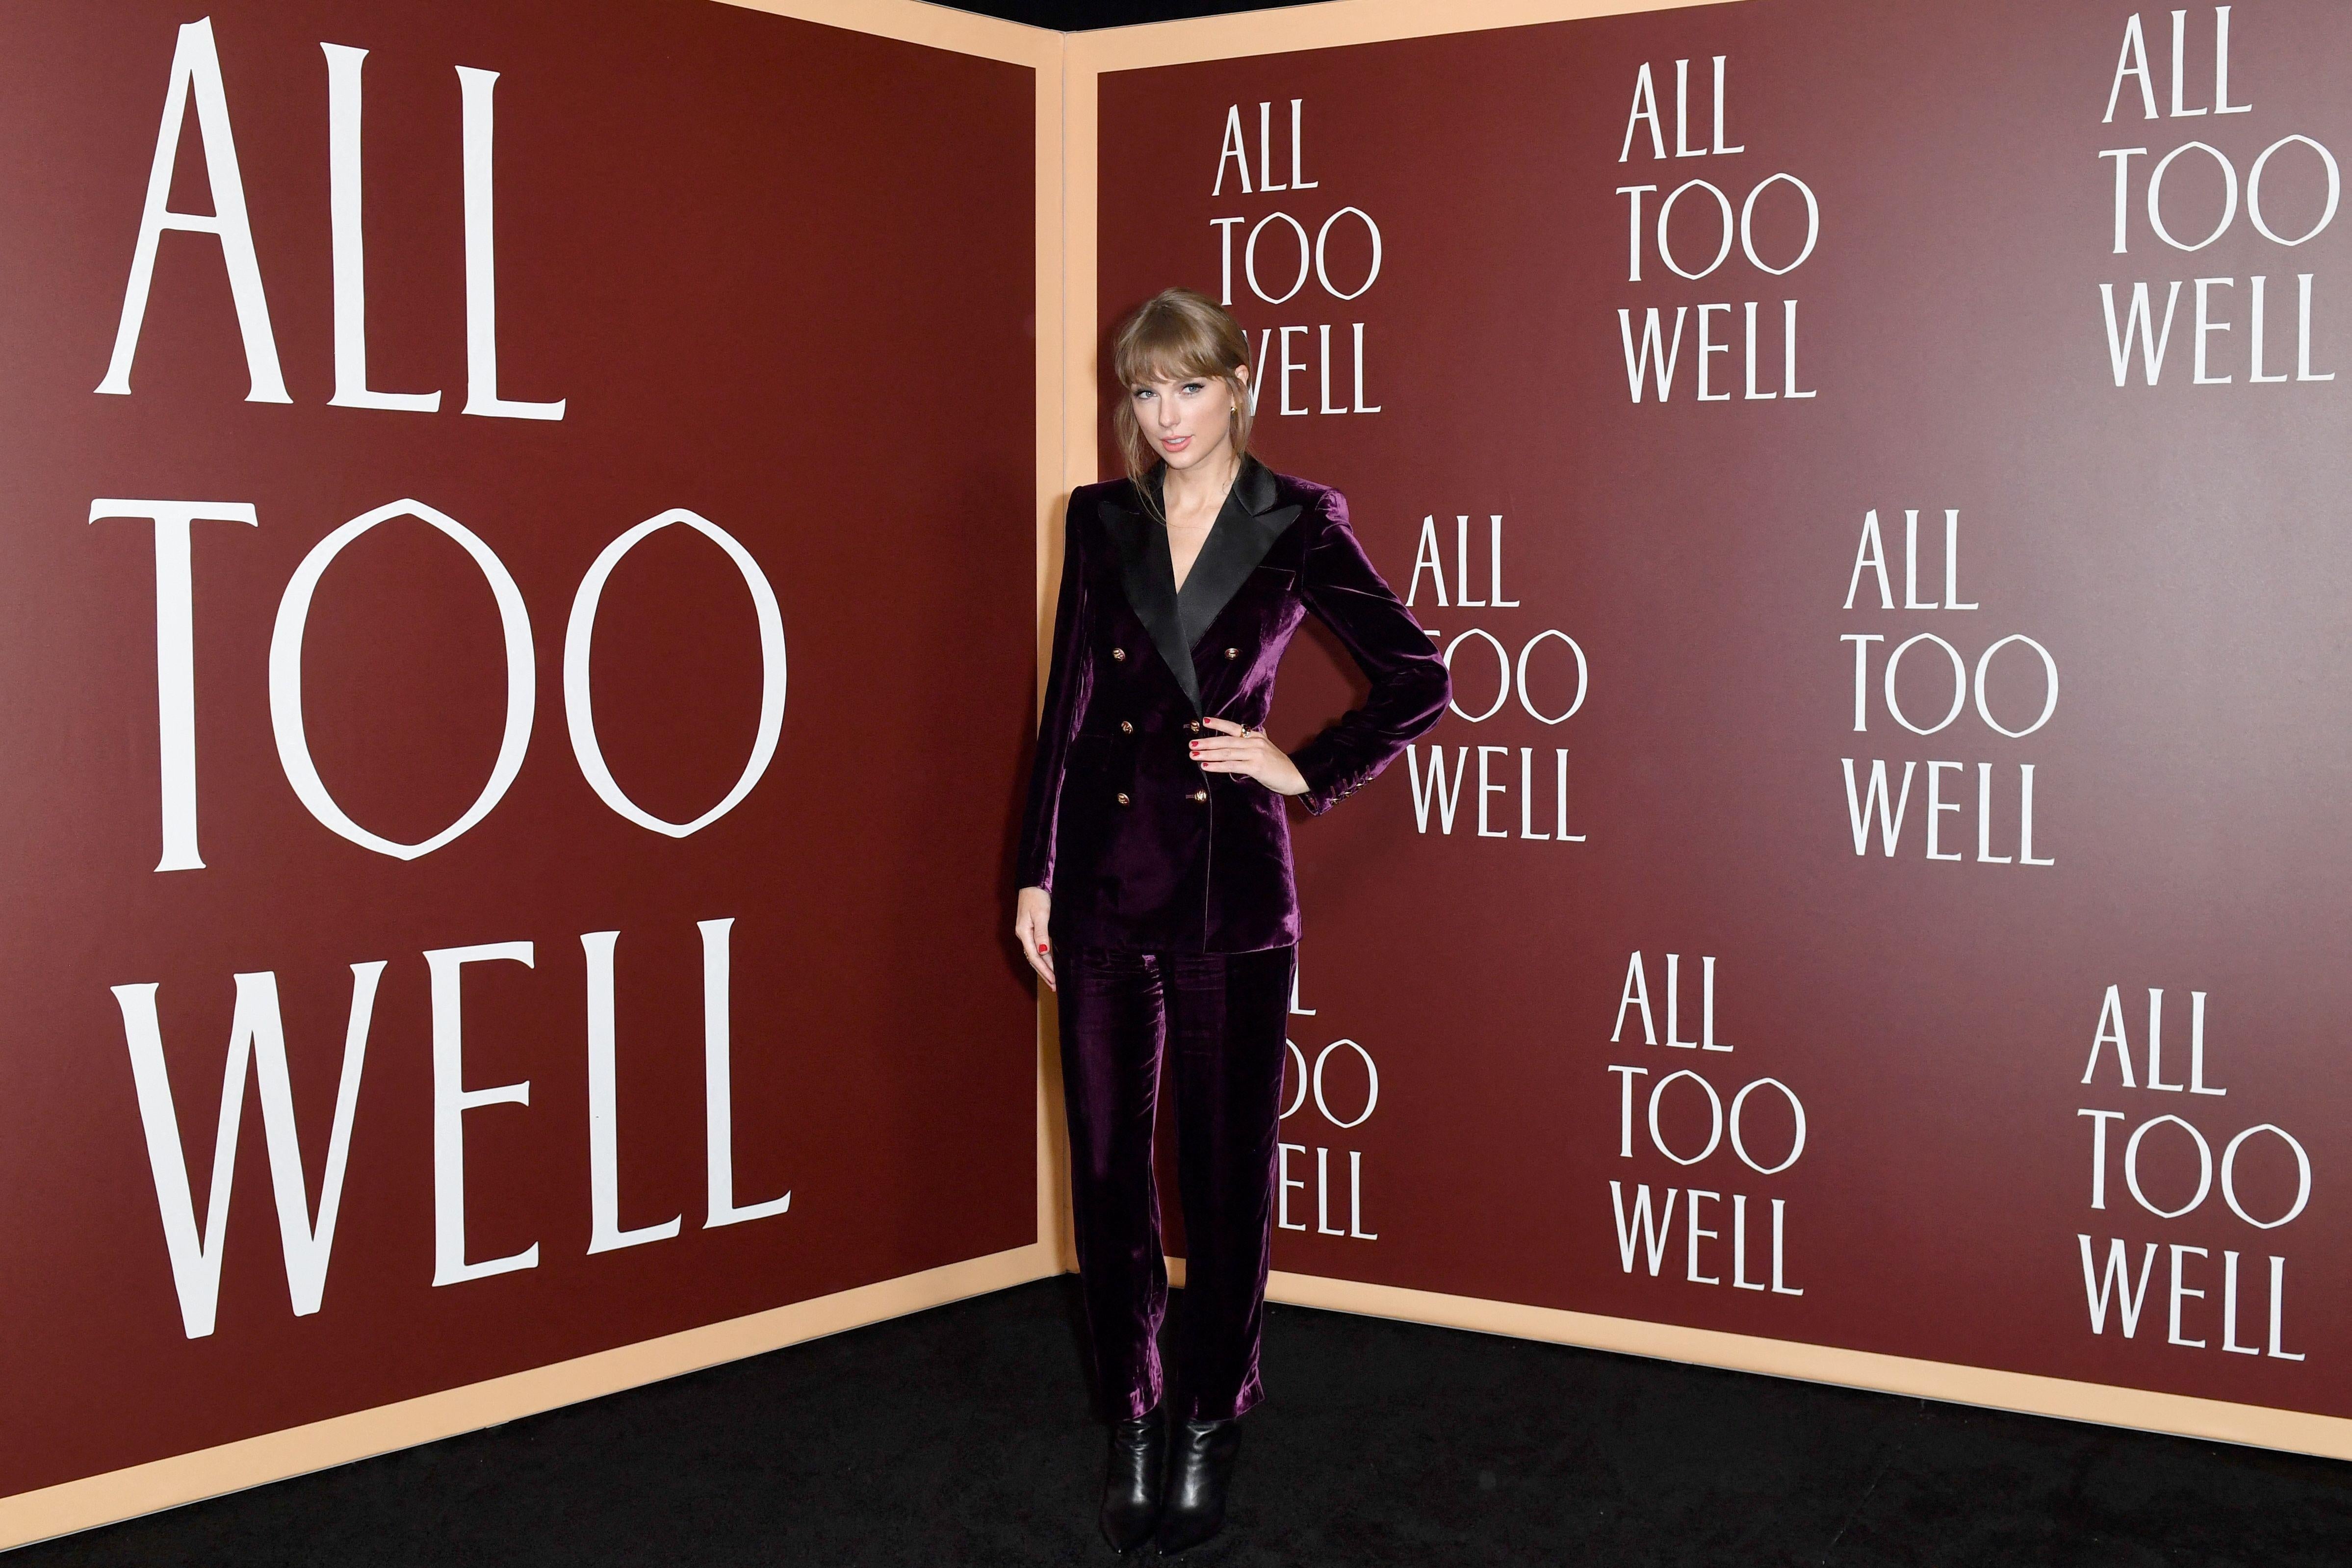 Taylor Swift attends the "All Too Well" premiere at AMC Lincoln Square on November 12, 2021 in New York. (Photo by ANGELA WEISS / AFP) (Photo by ANGELA WEISS/AFP via Getty Images)